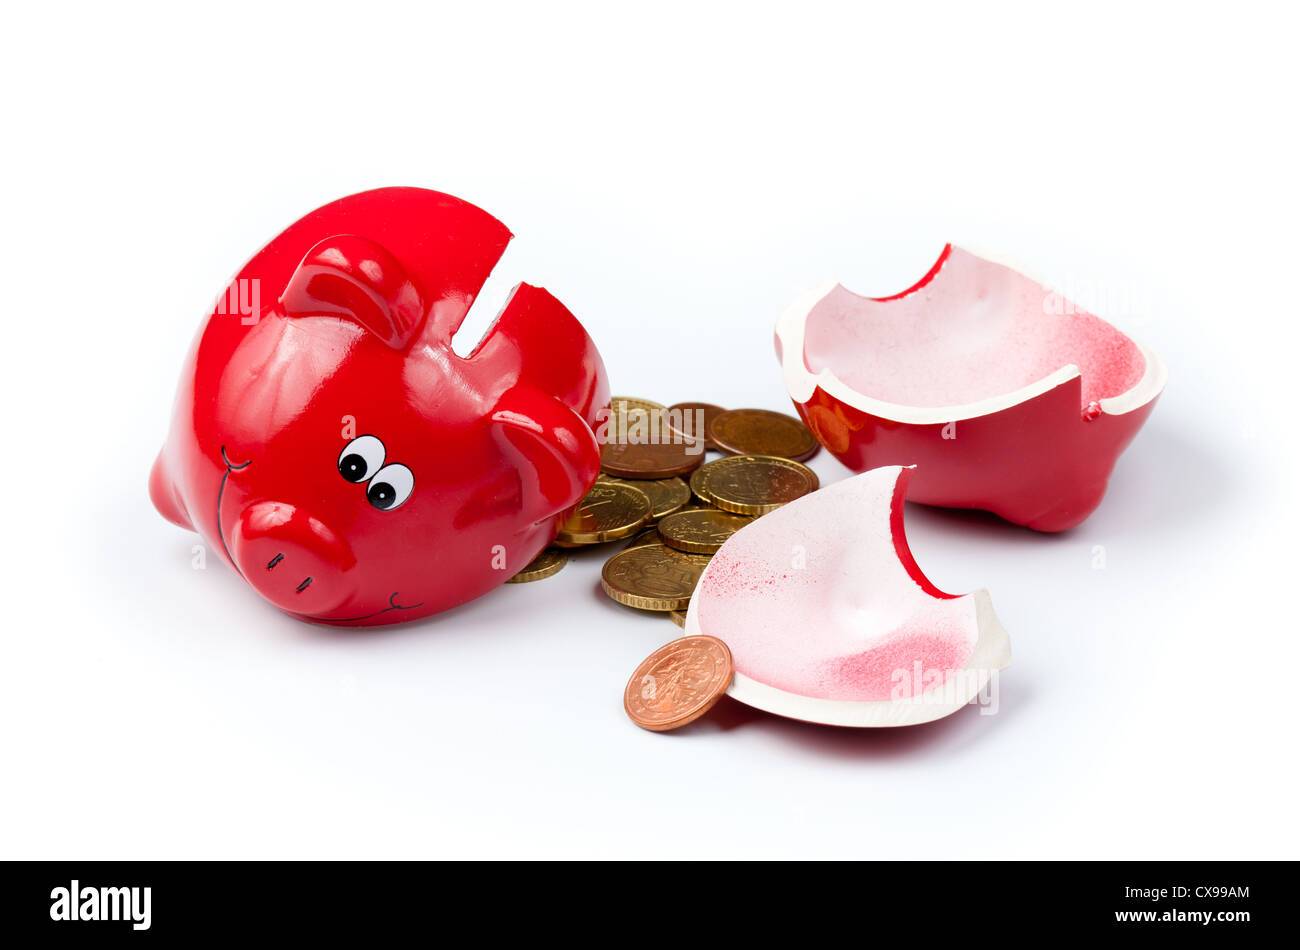 Broken piggy bank or money box with coins isolated on white Stock Photo